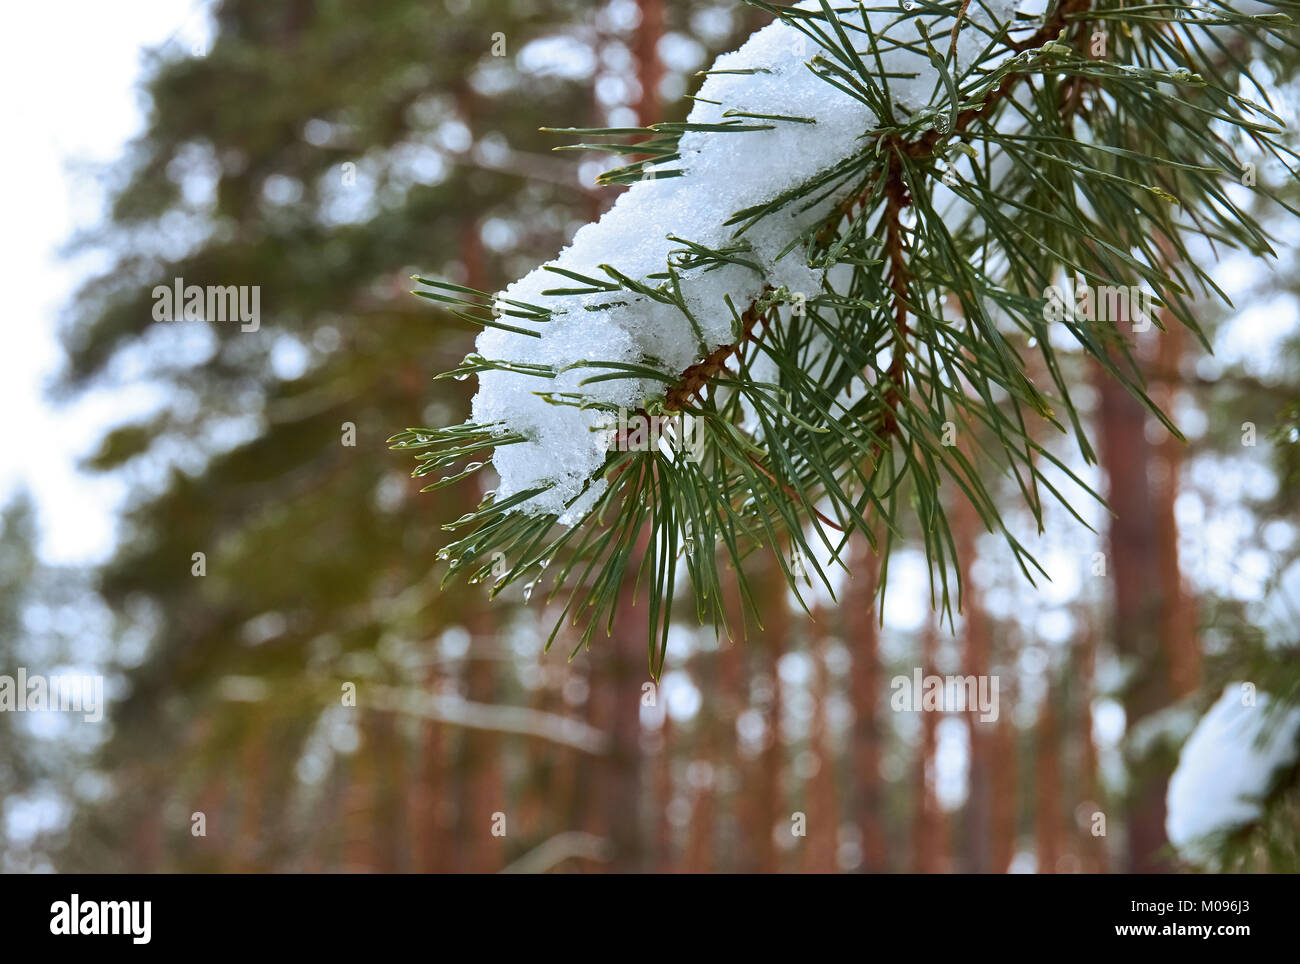 Branch of pine with needle and snow with blurred forest background Stock Photo